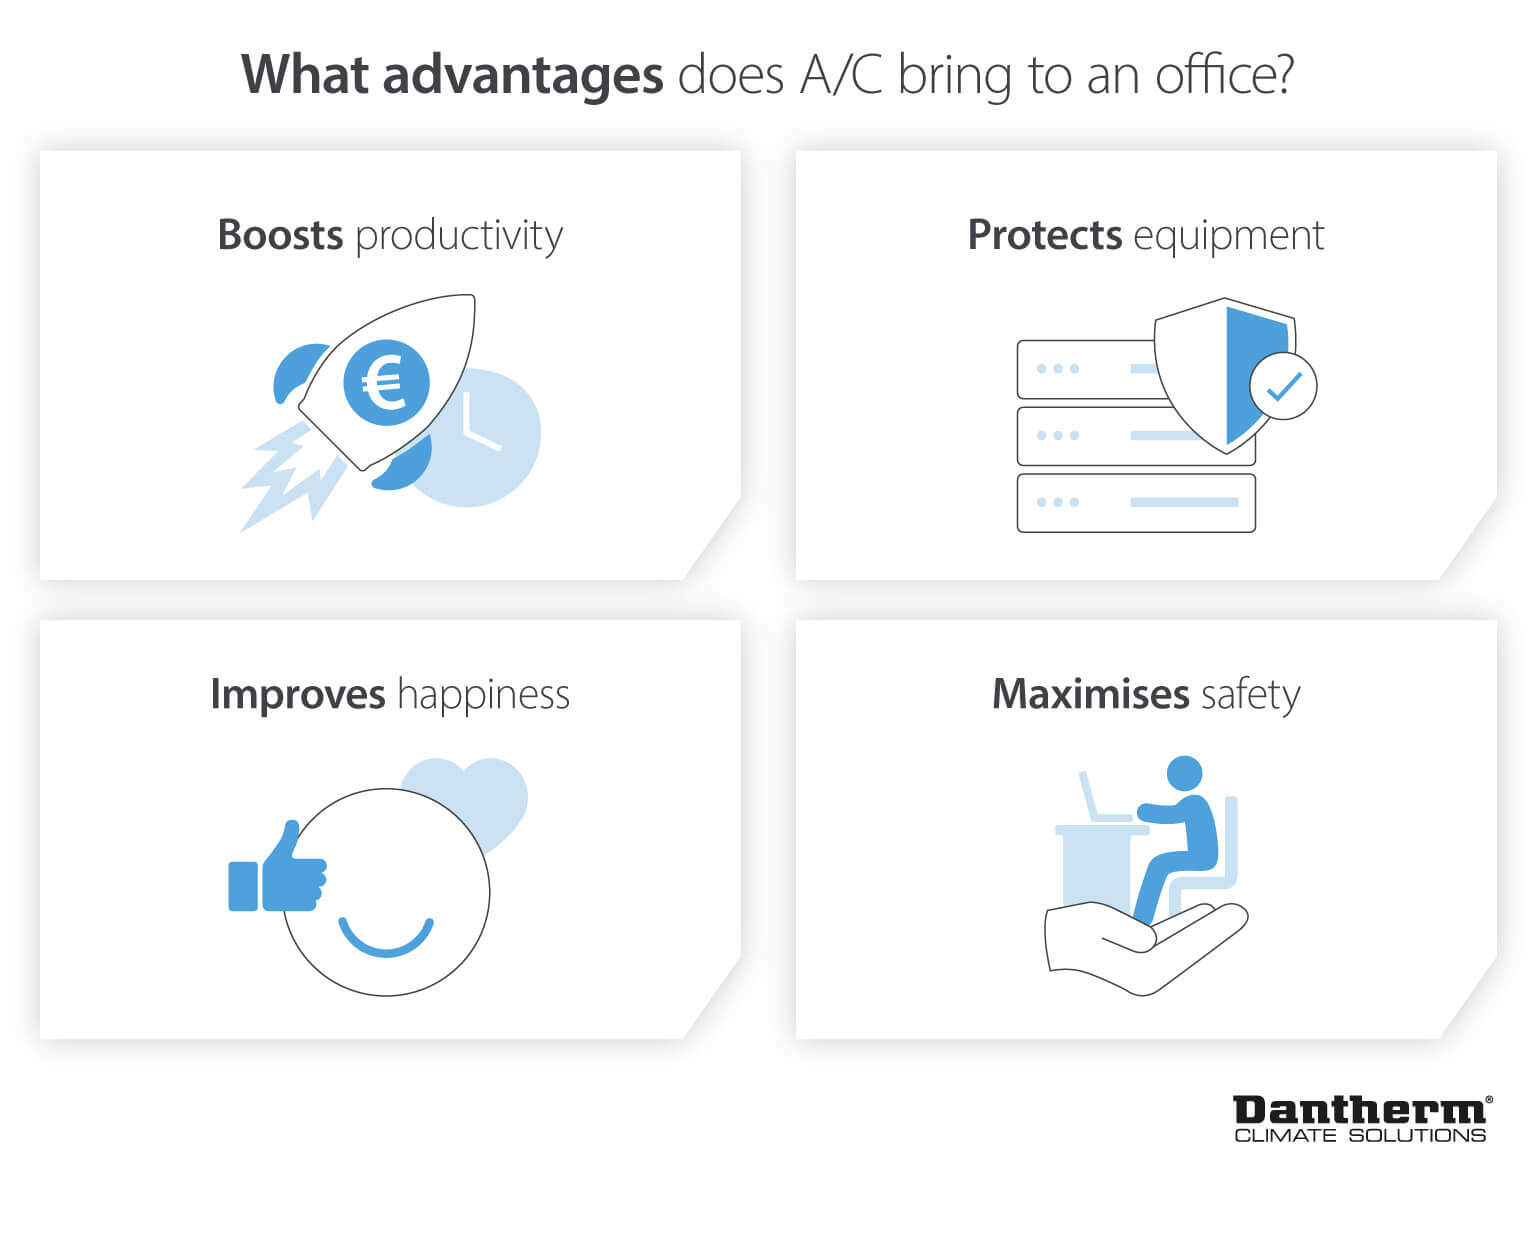 4 advantages of having portable air conditioning units in warm offices - Infographic image